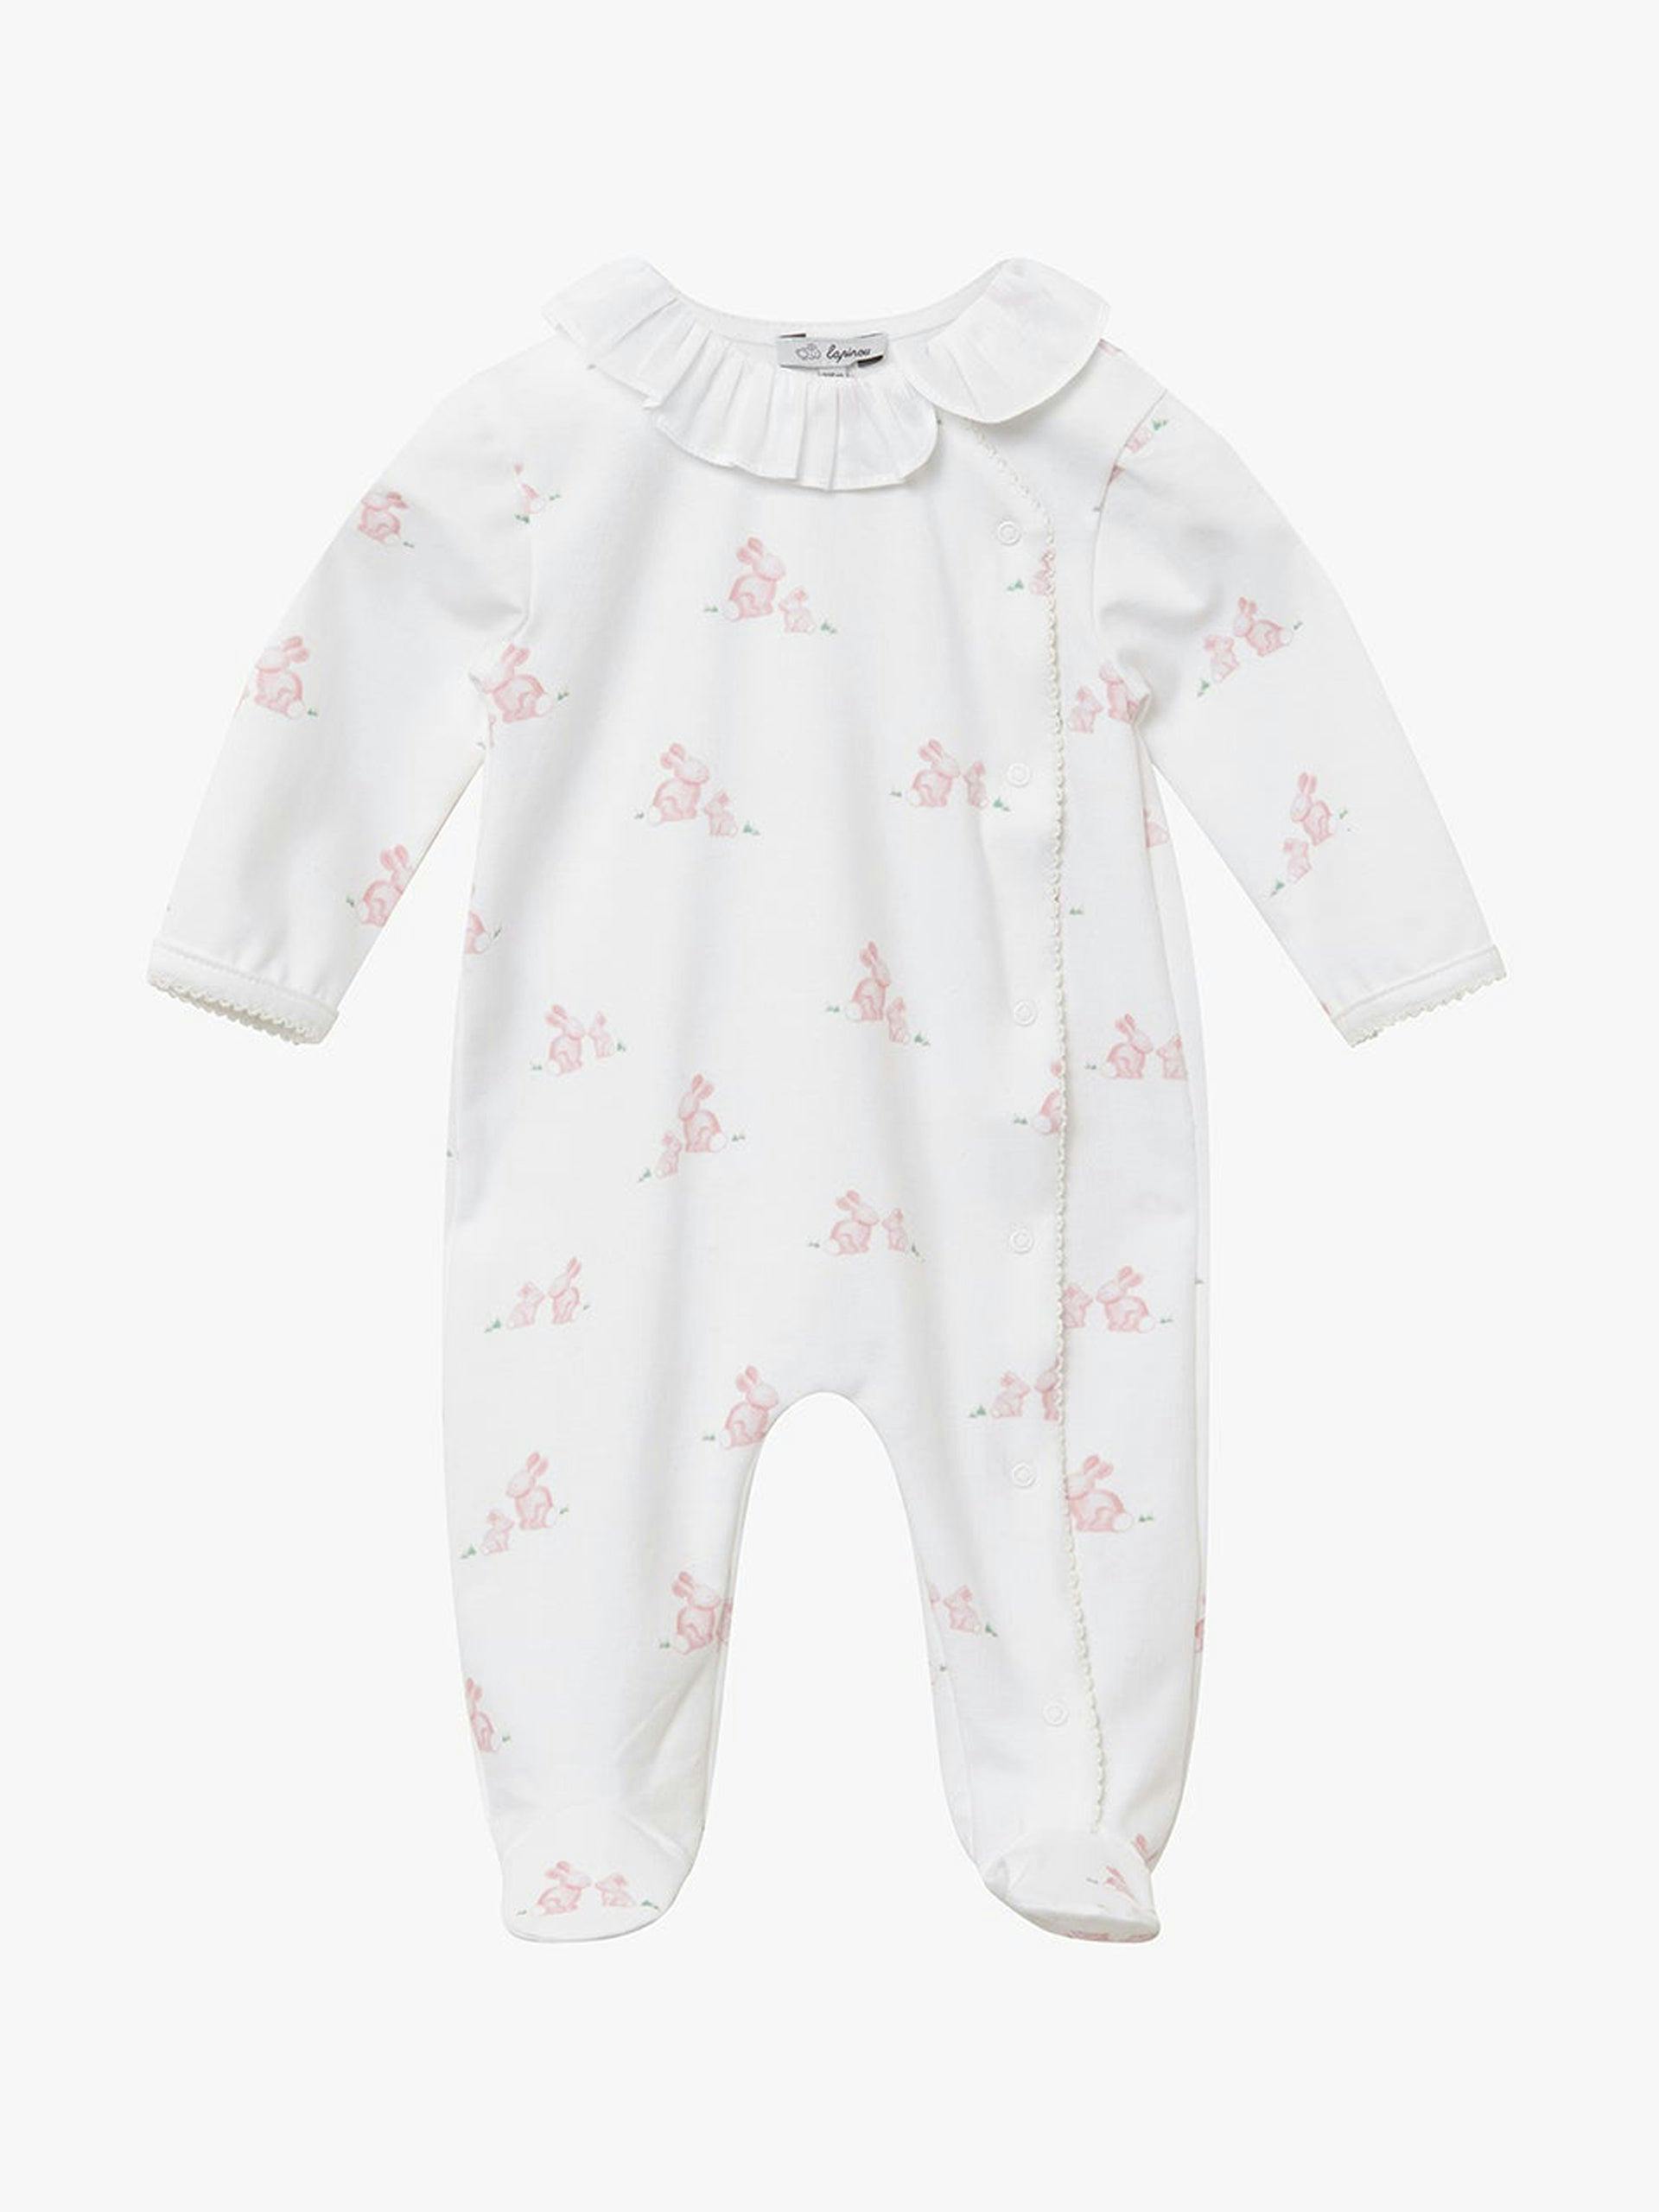 Pink bunny all-in-one for little ones